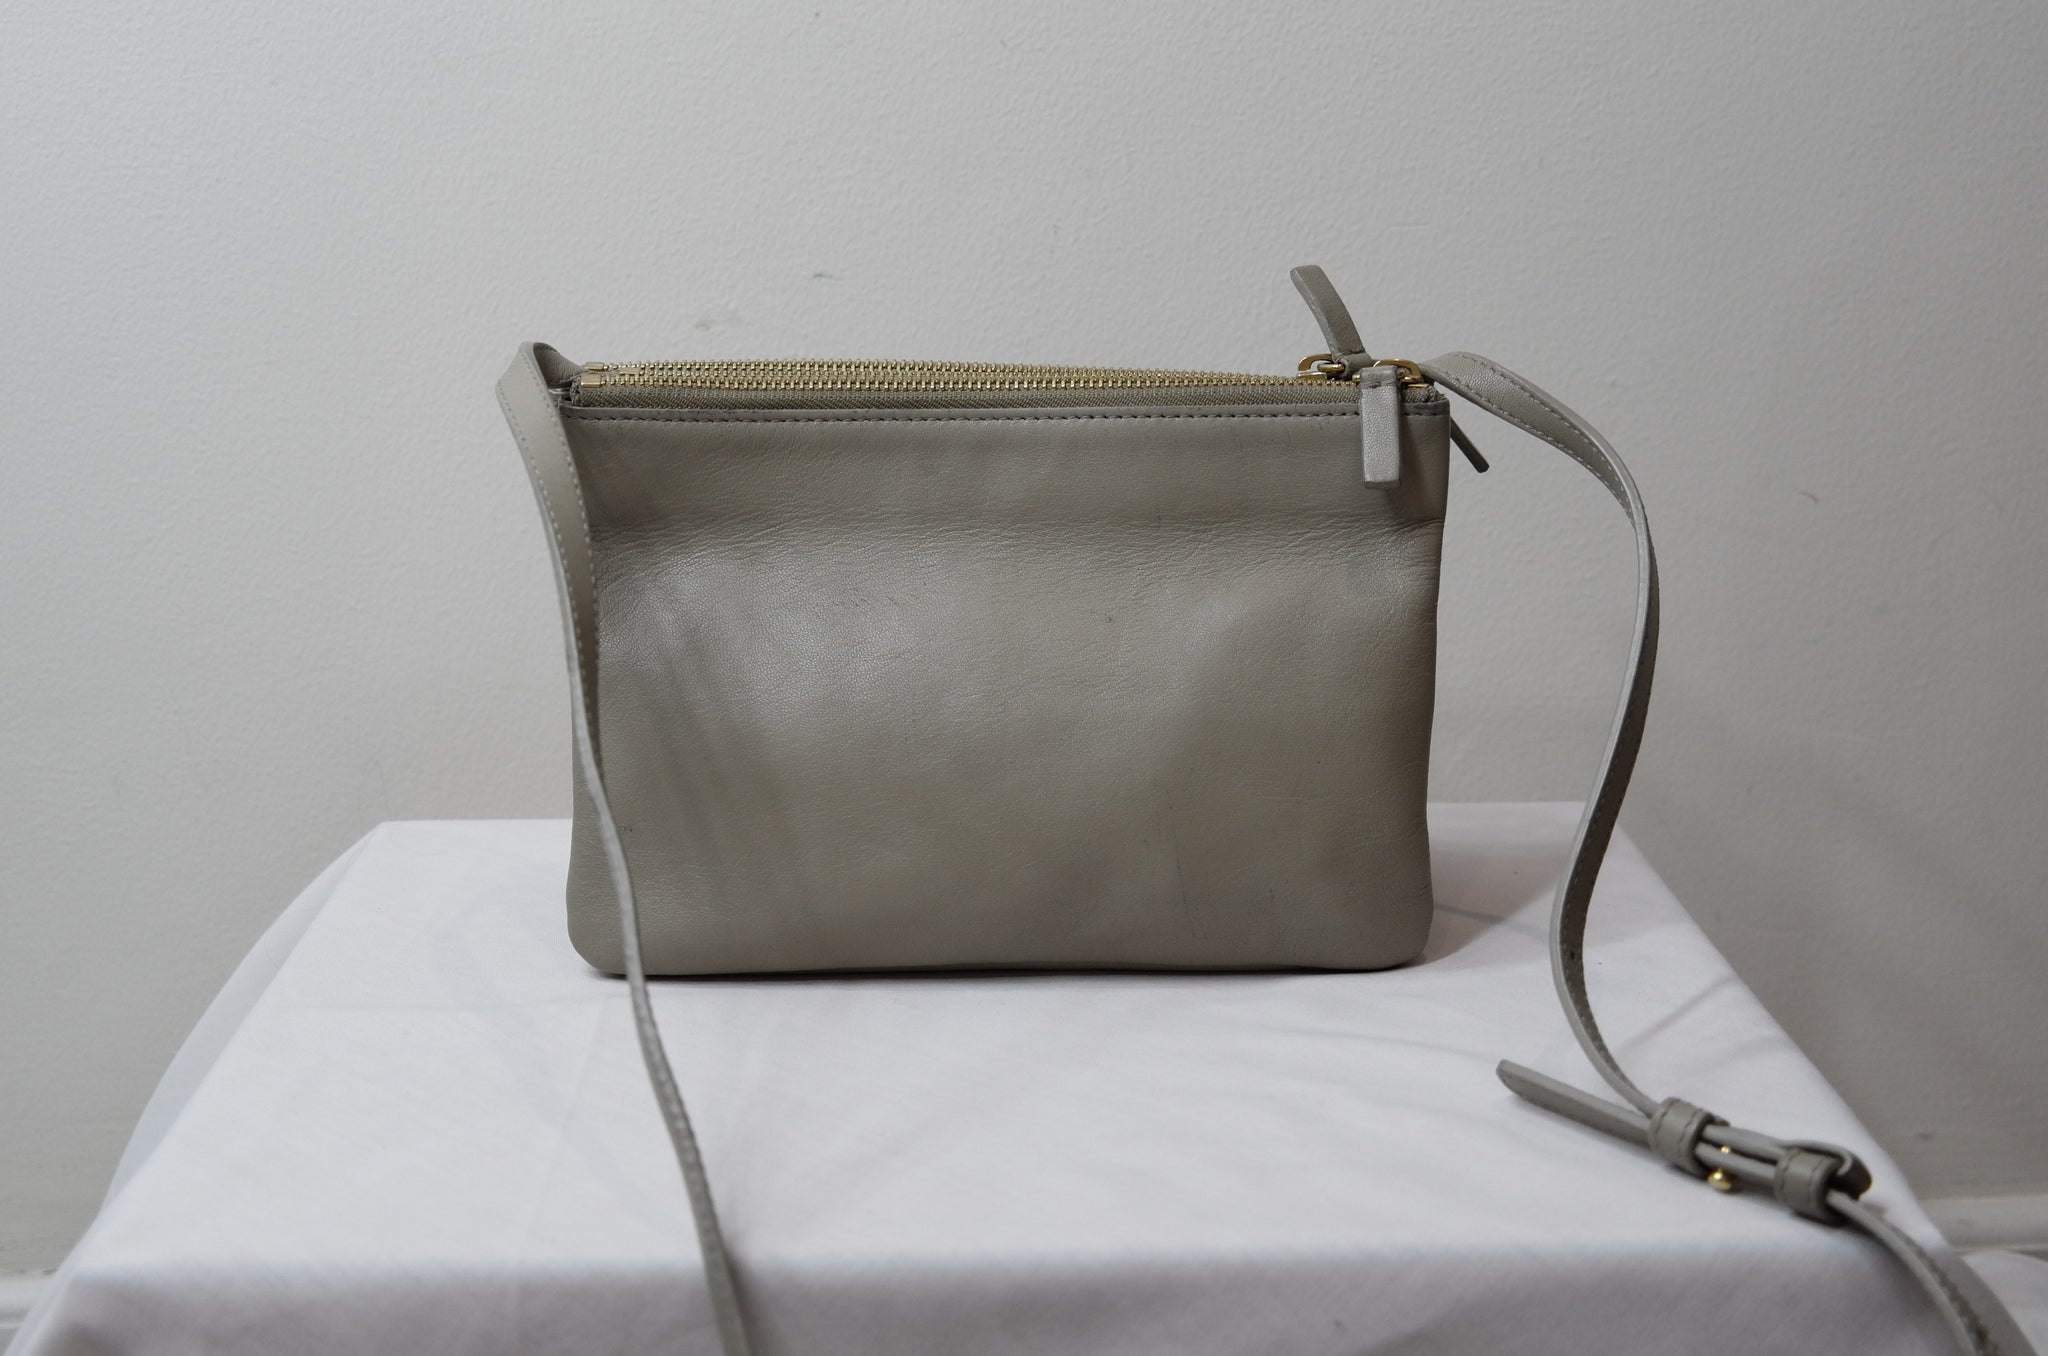 CELINE TRIO SMALL trio Small shoulder bag leather [used] With